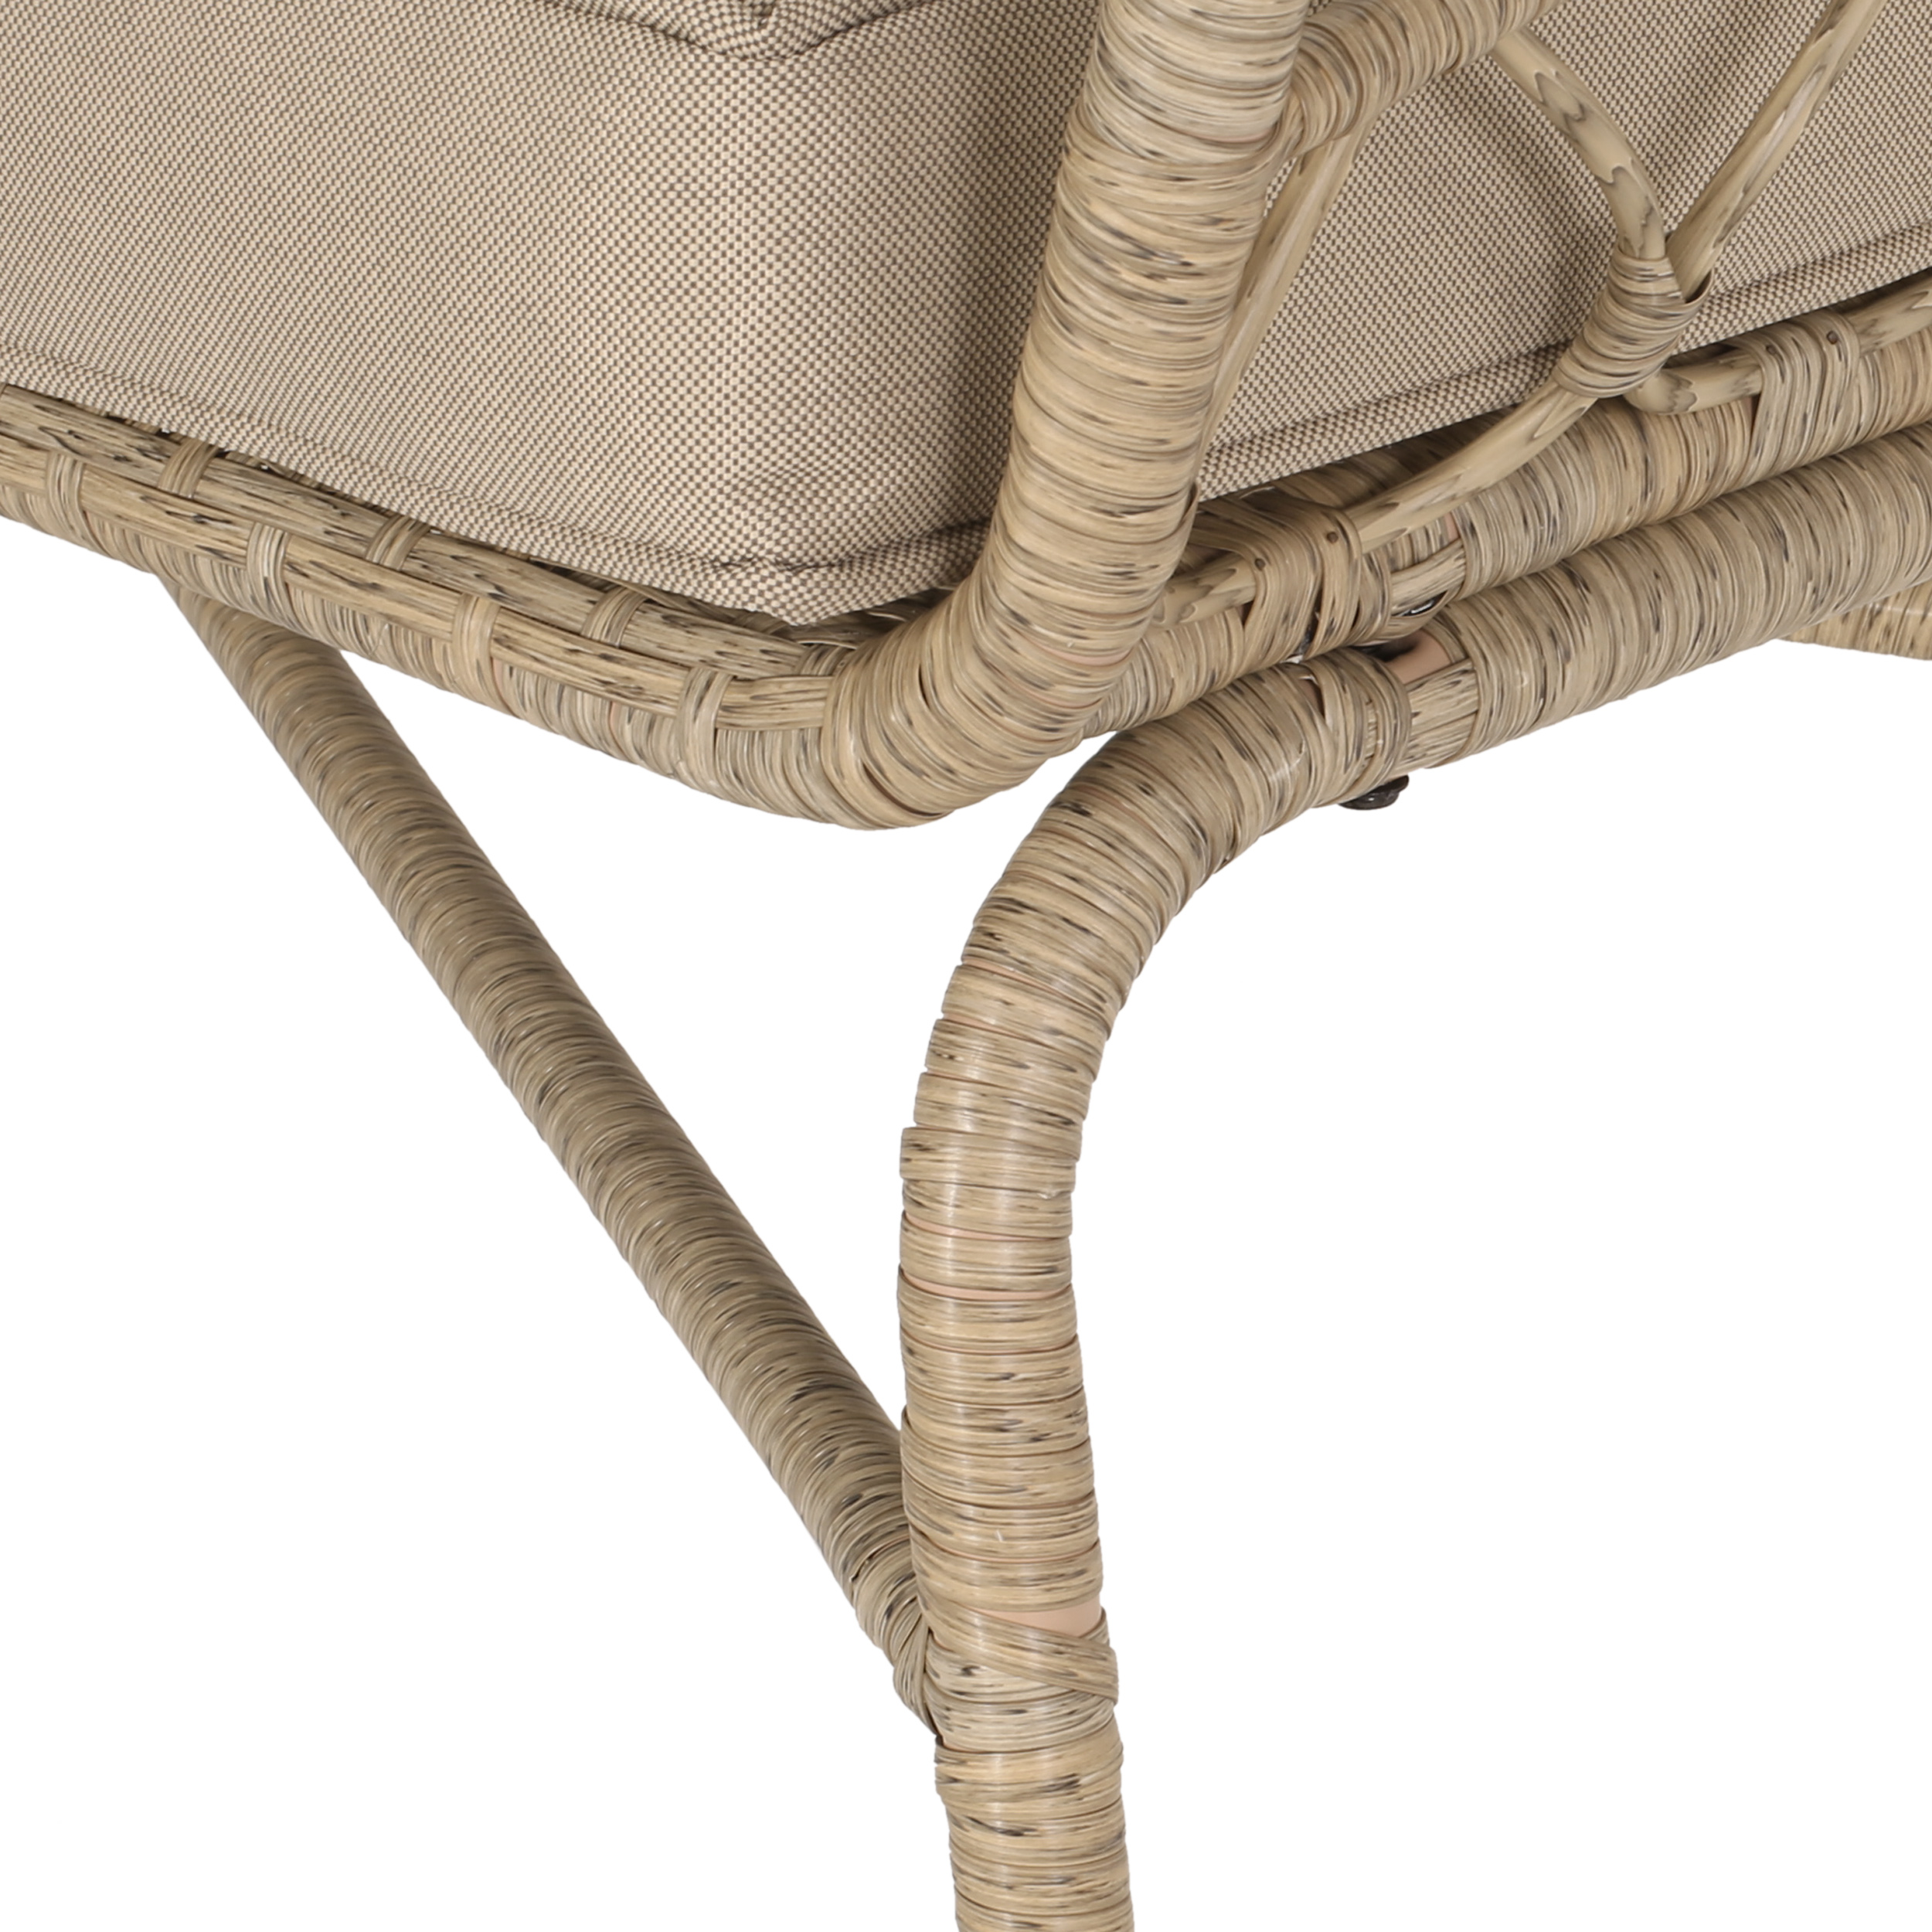 GDF Studio Colmar Outdoor Wicker 3 Piece Chat Set with Cushions, Light Brown and Beige - image 3 of 8